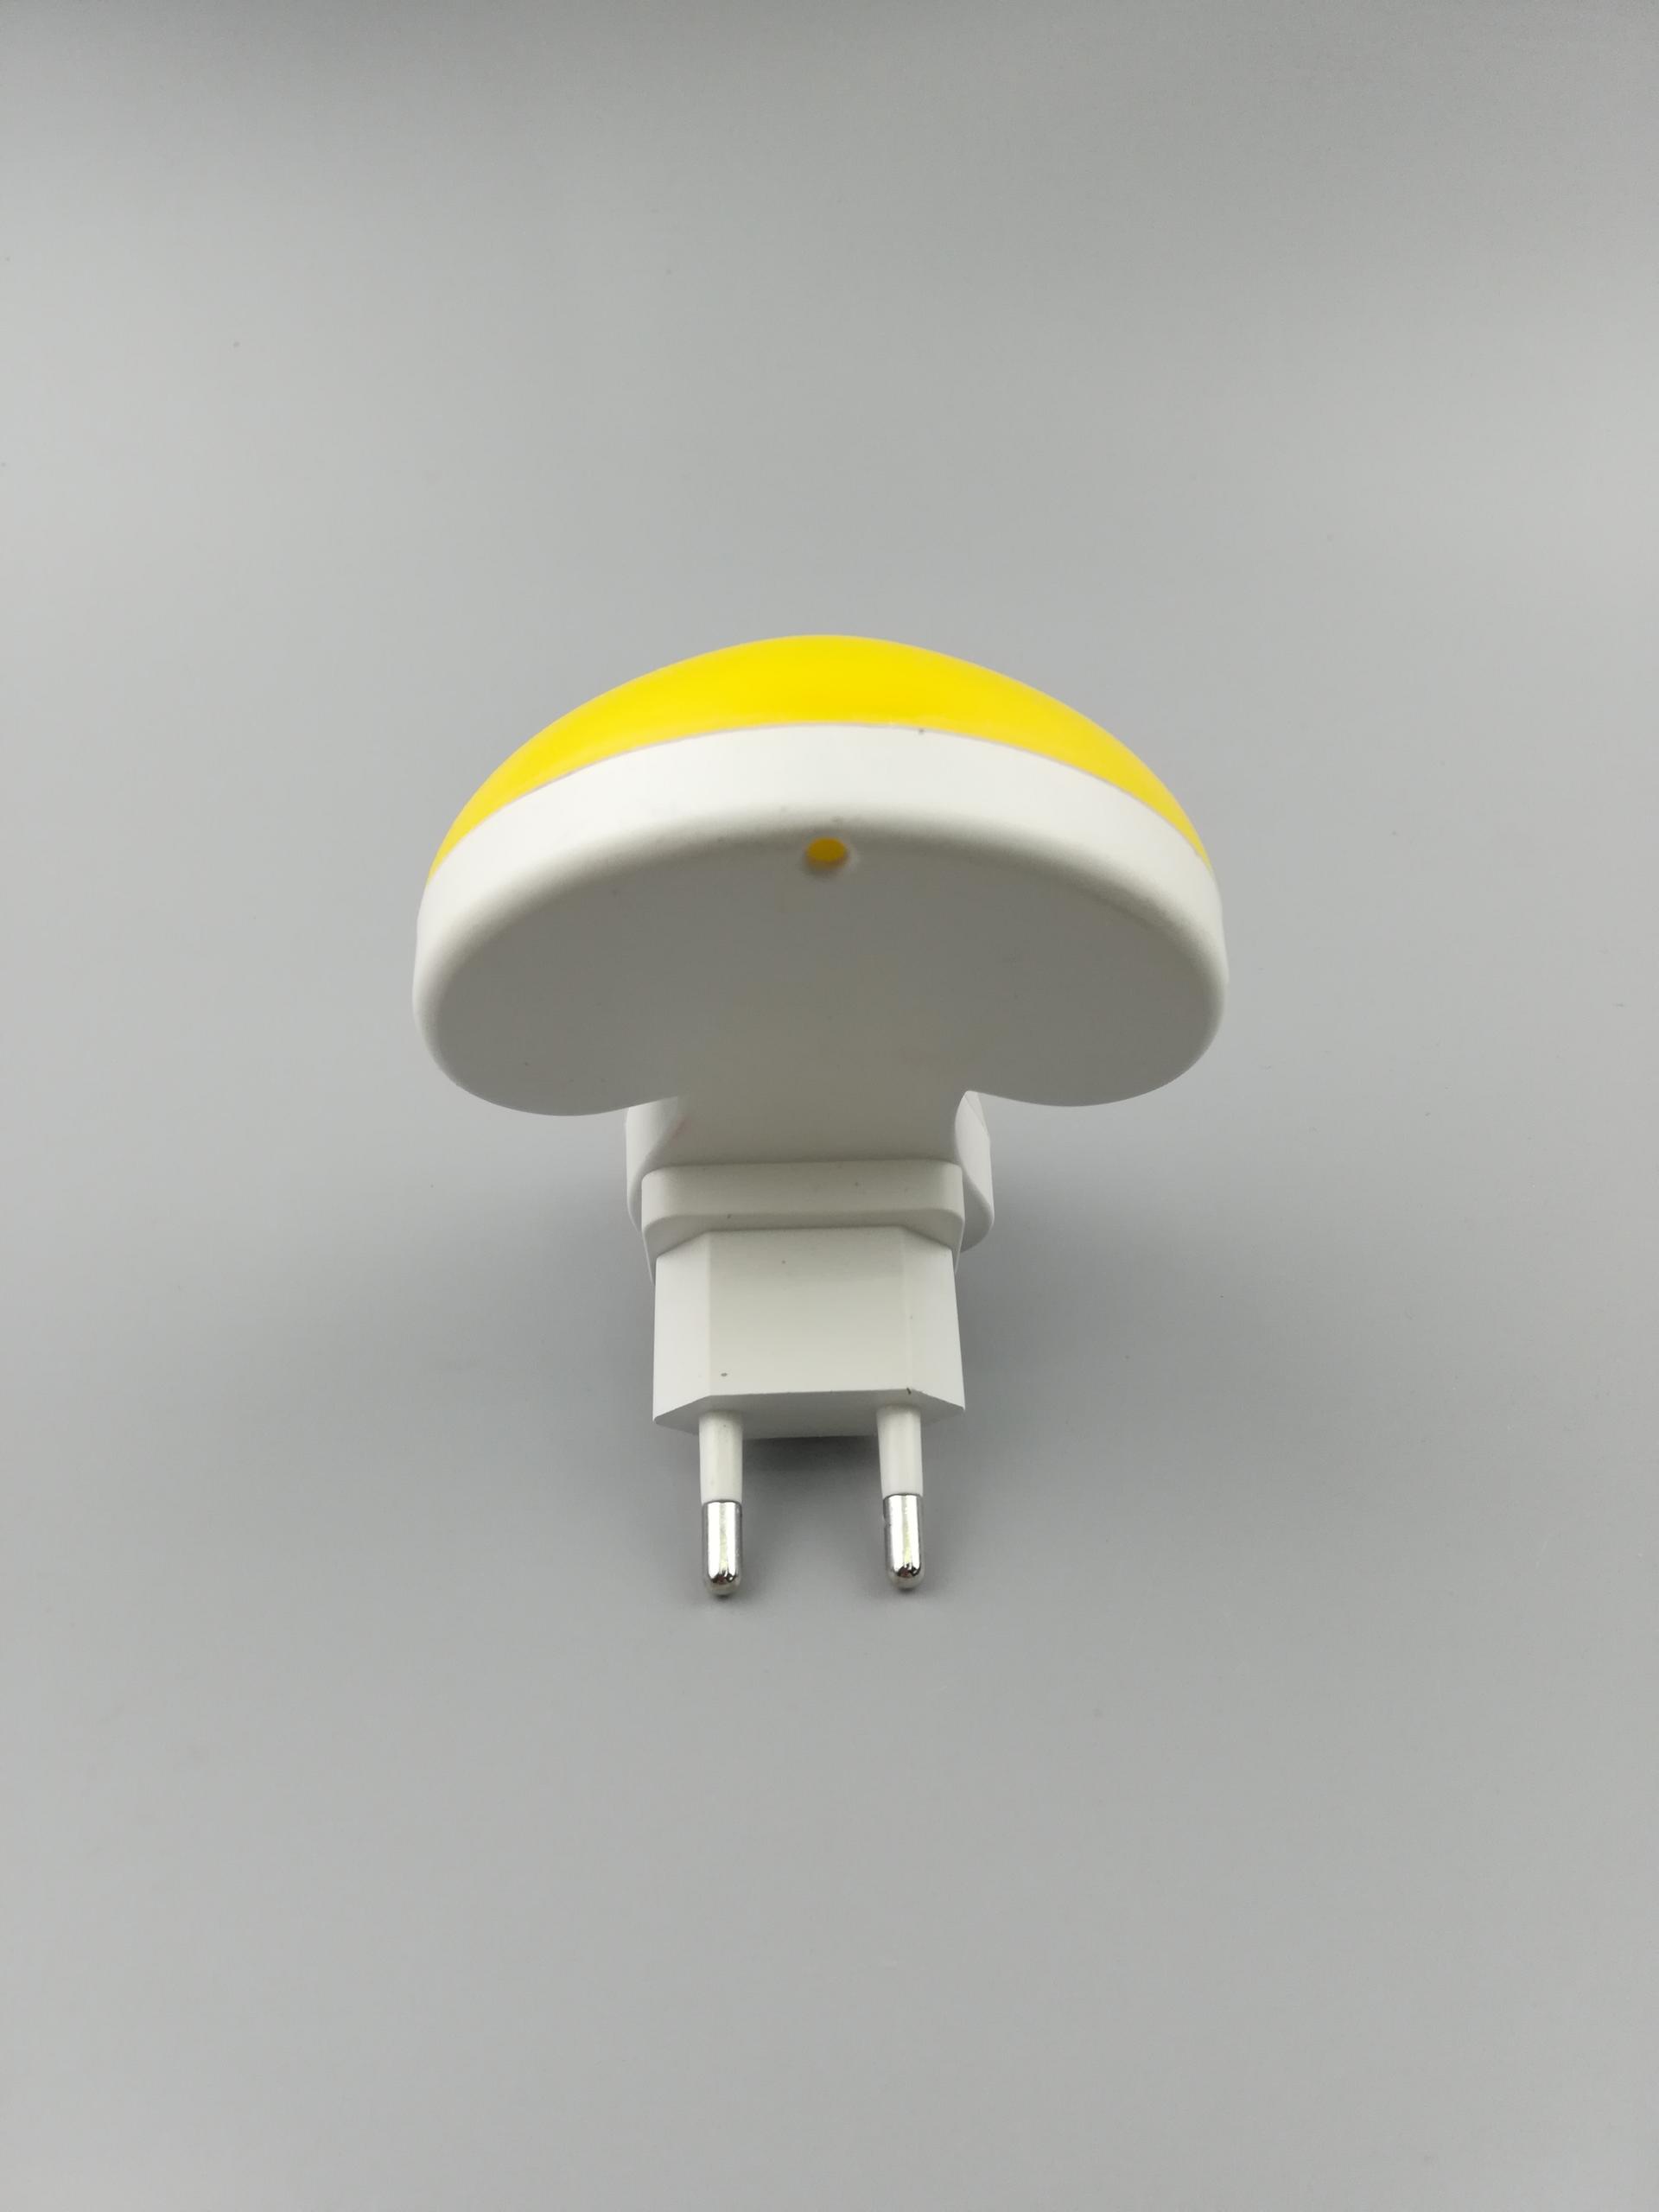 W116 The mushroom lamp switch plug in led night light For Baby Bedroom wall decoration